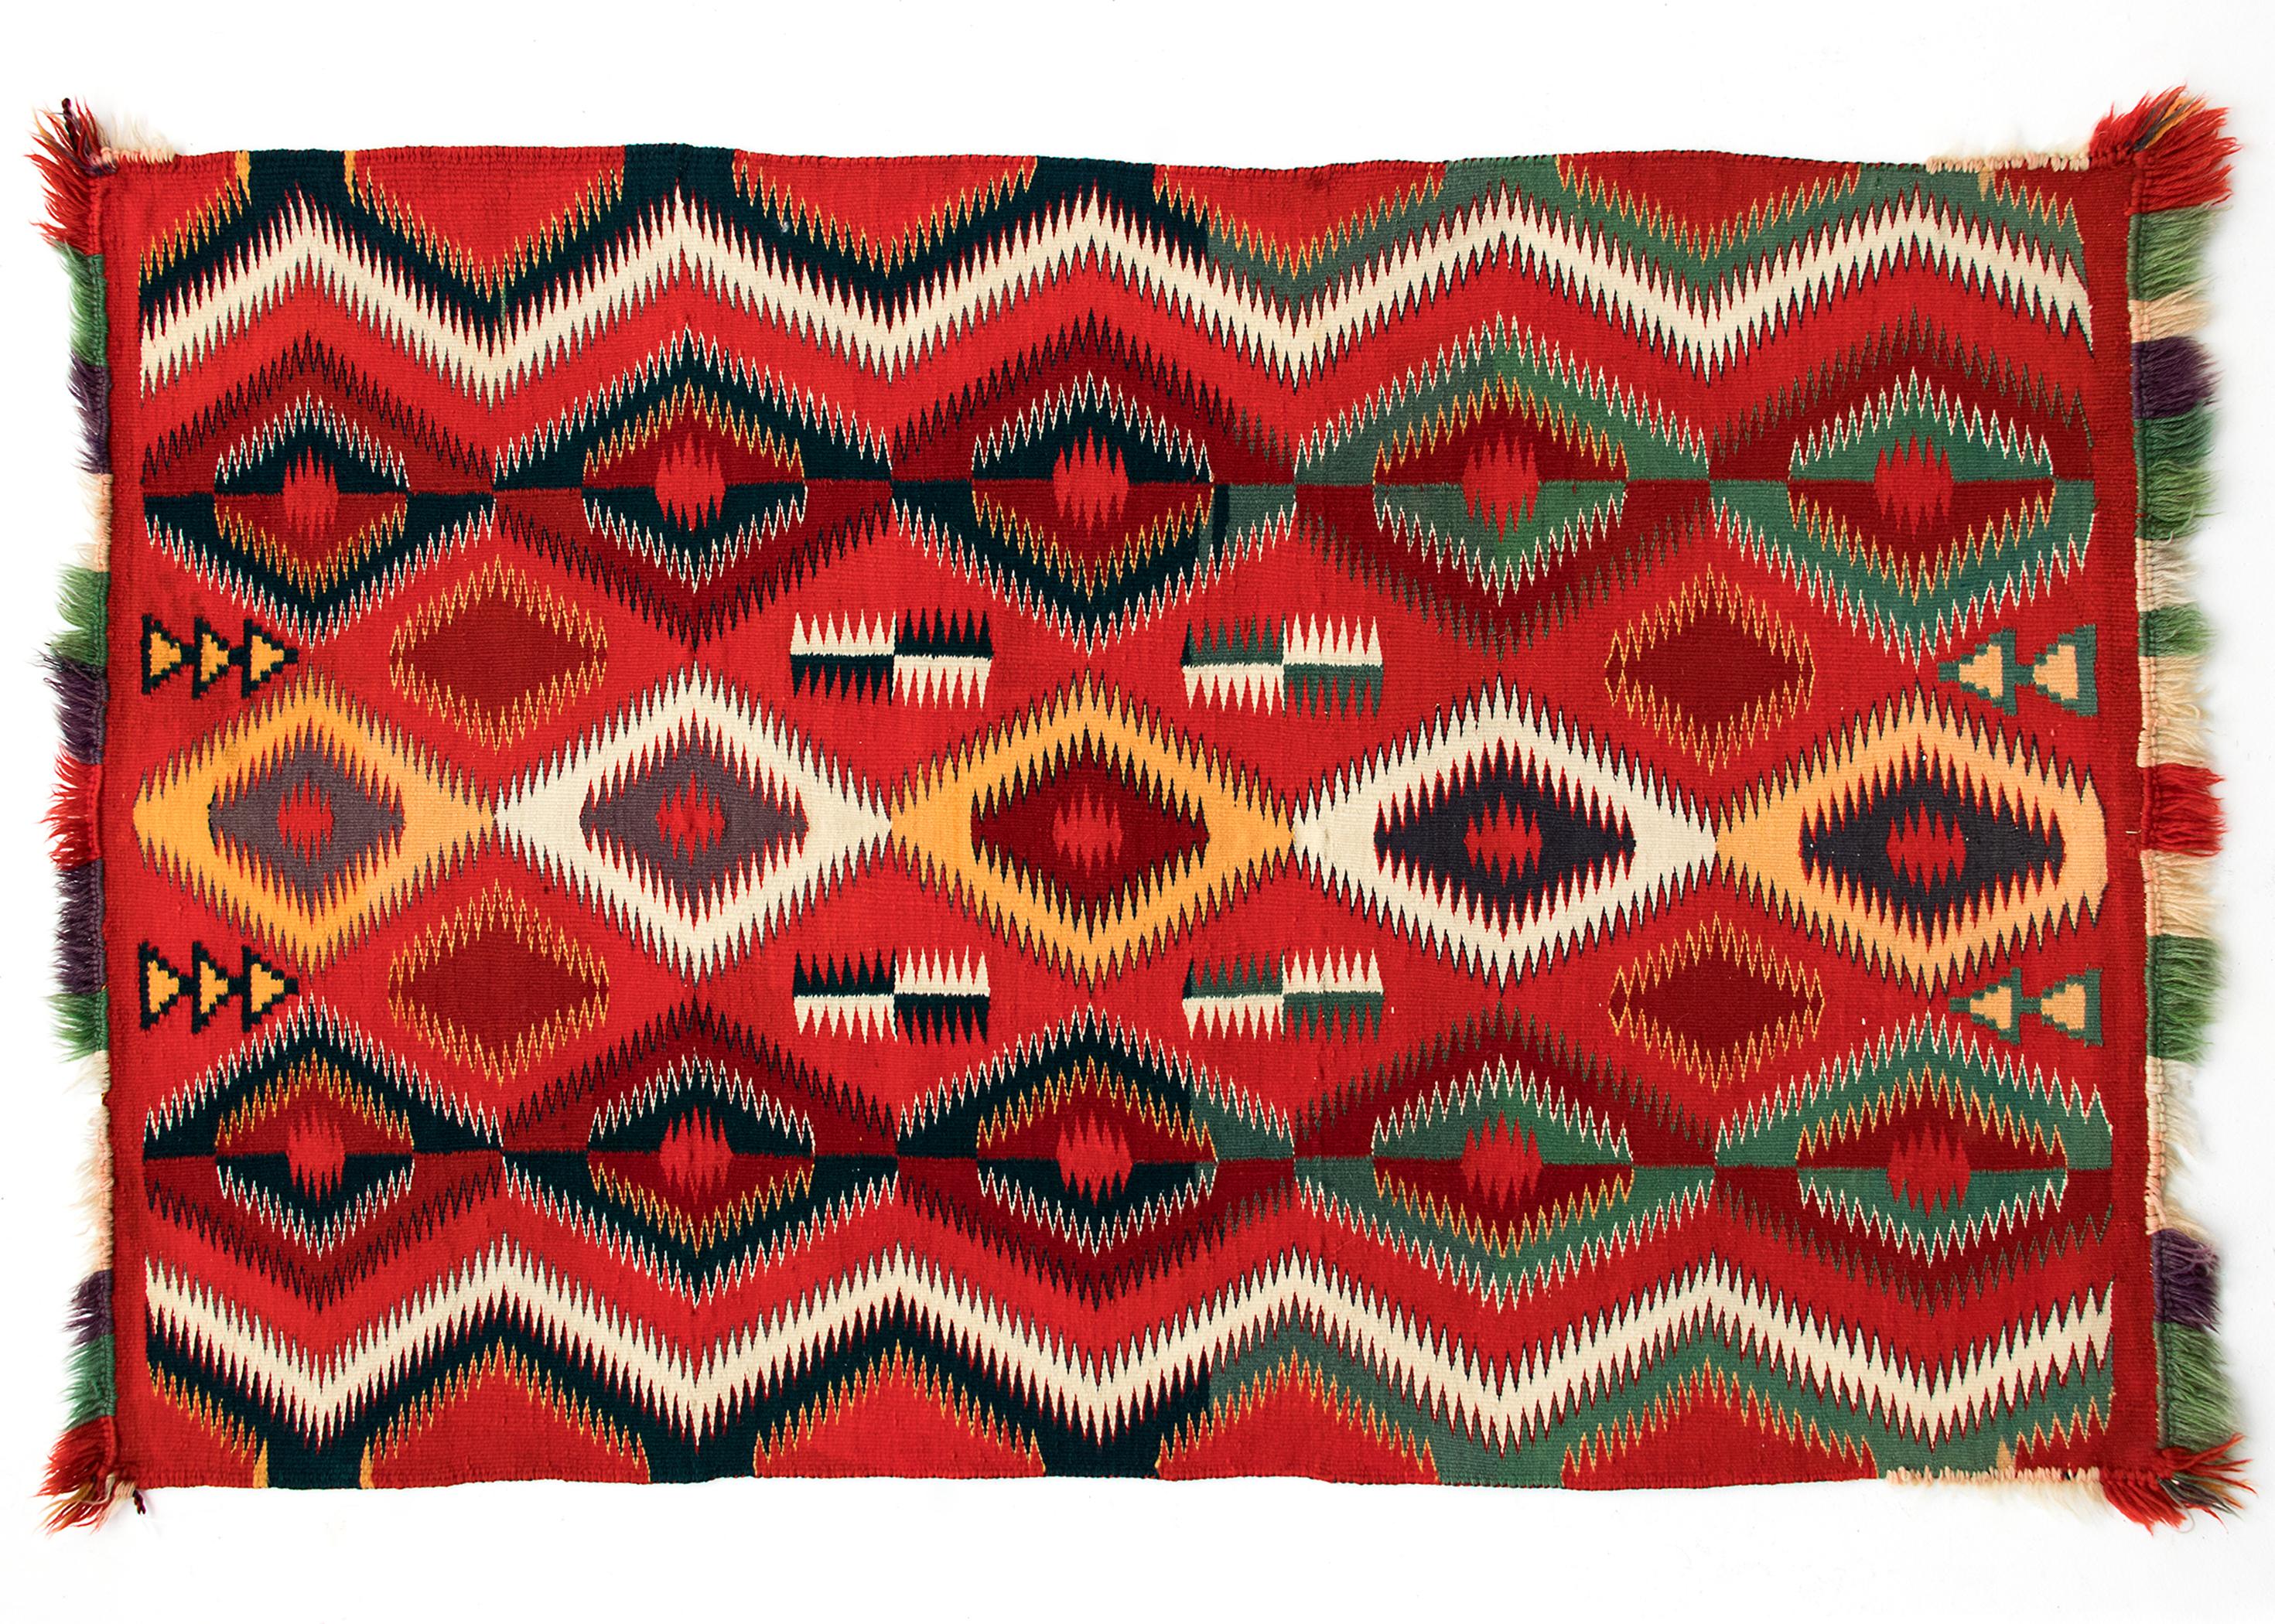 Antique Navajo Blanket woven circa 1890 of Germantown yarns (commercial yarns originating from mills in the area of Germantown, Pennsylvania that became popular in Navajo textiles of the late 19th century) with columns of stacked serrated diamonds